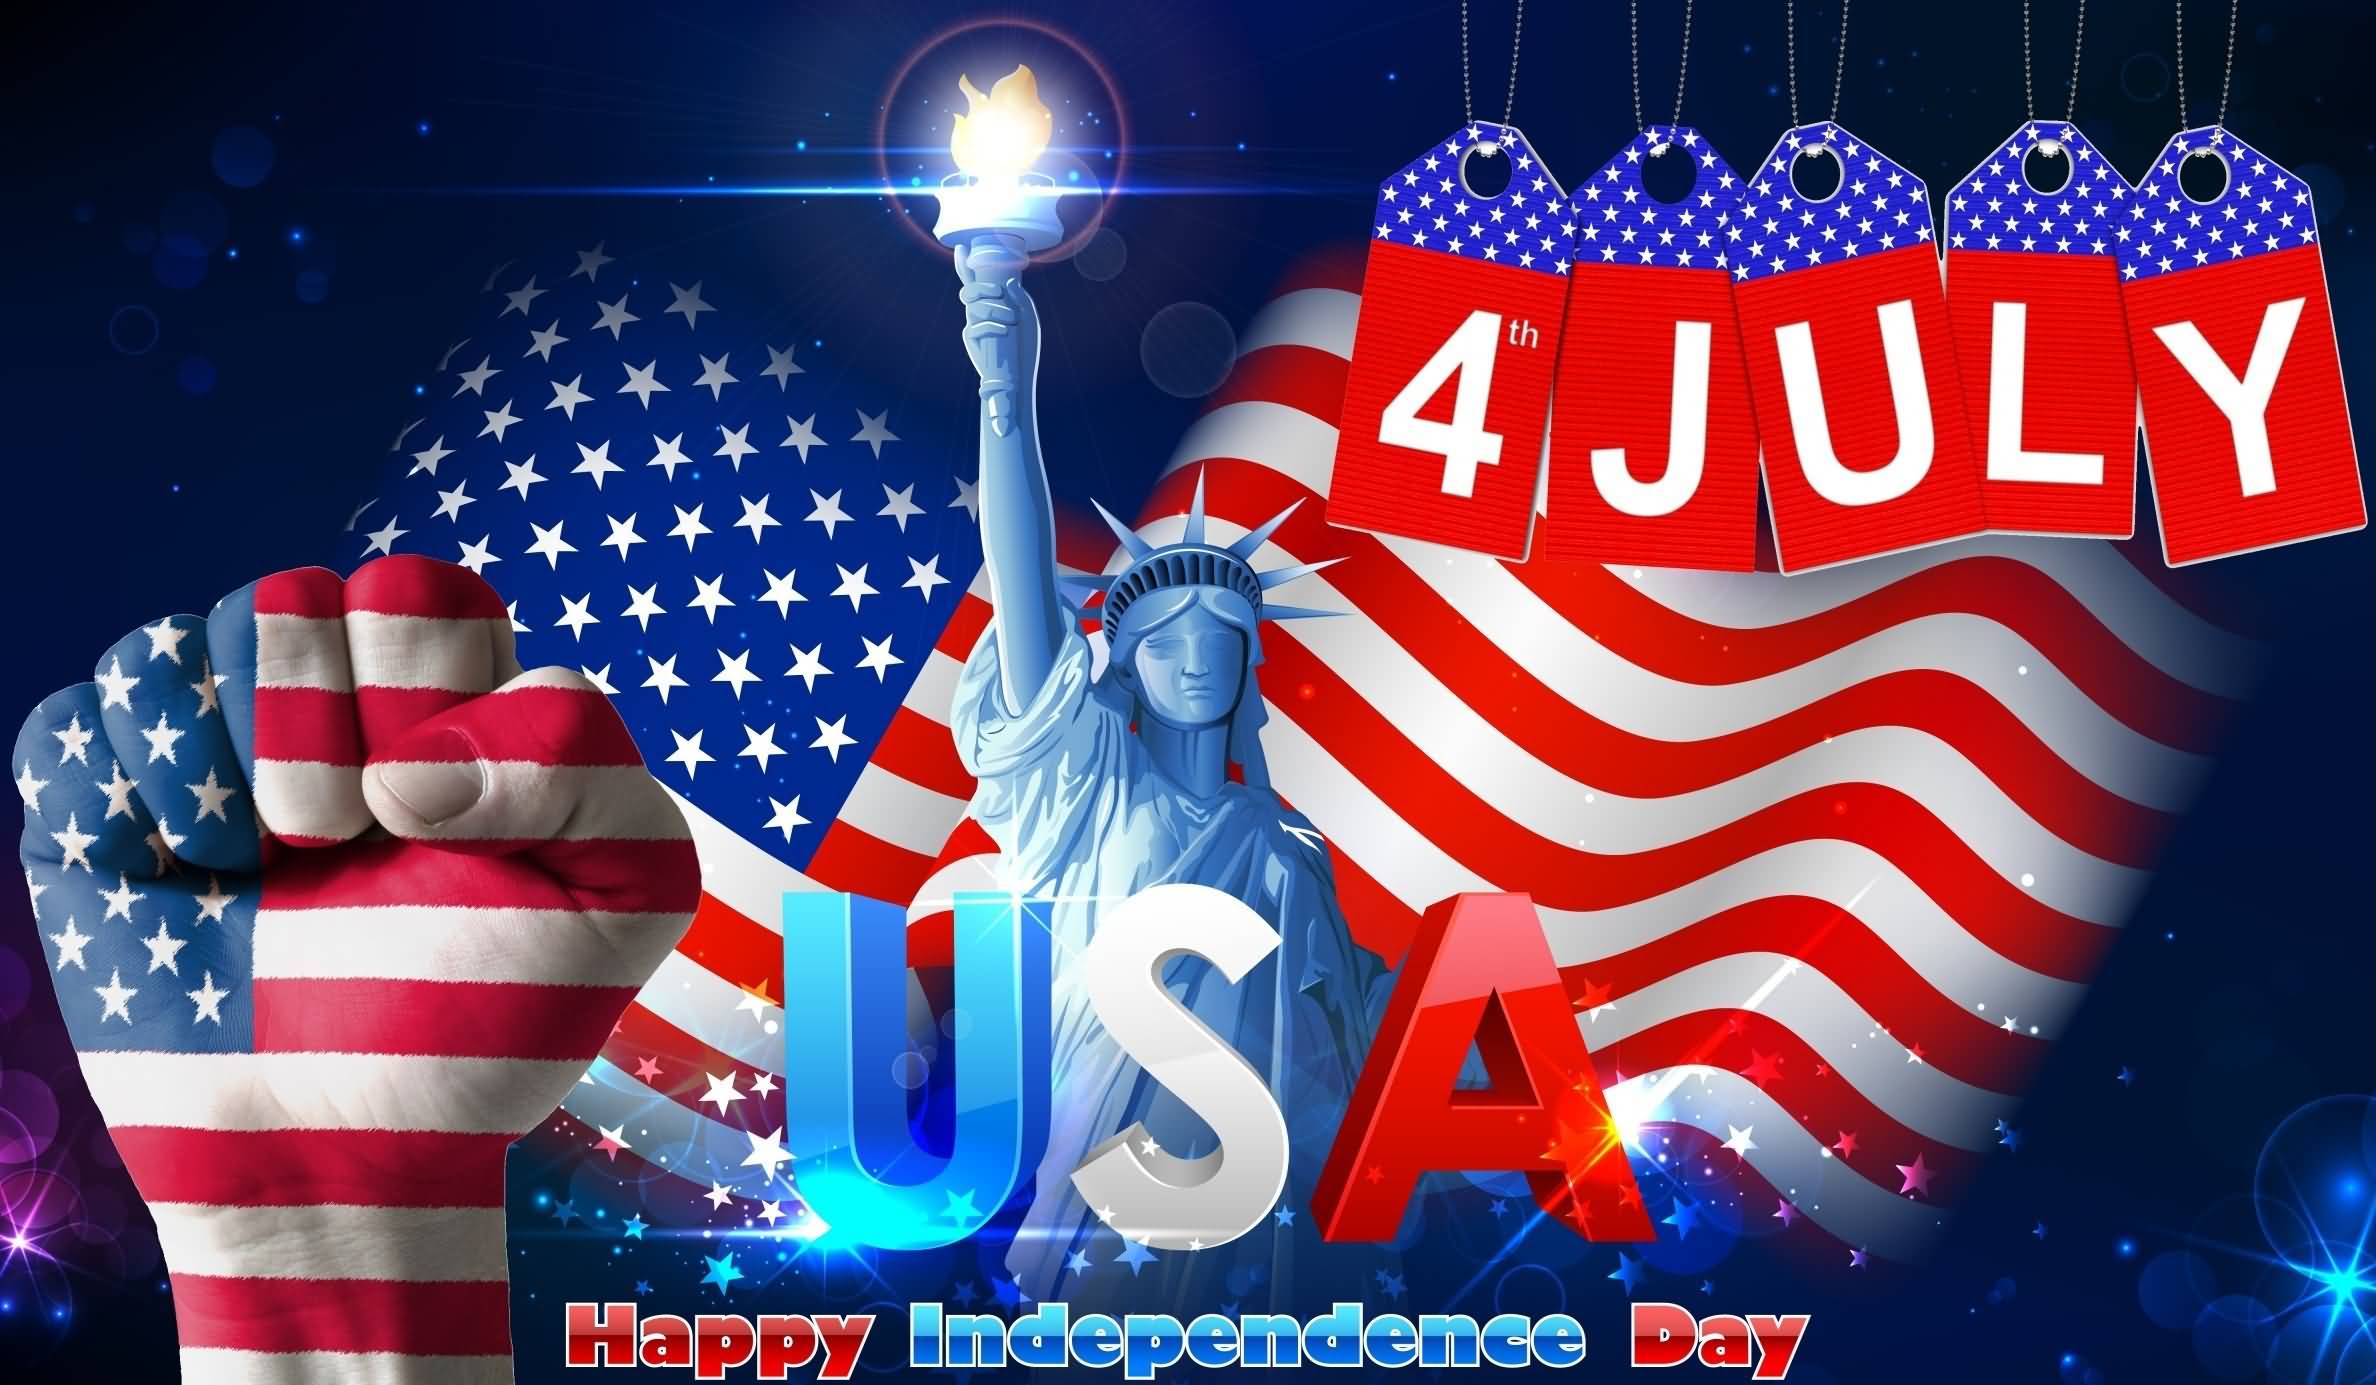 4th of July US Independence Day Greetings